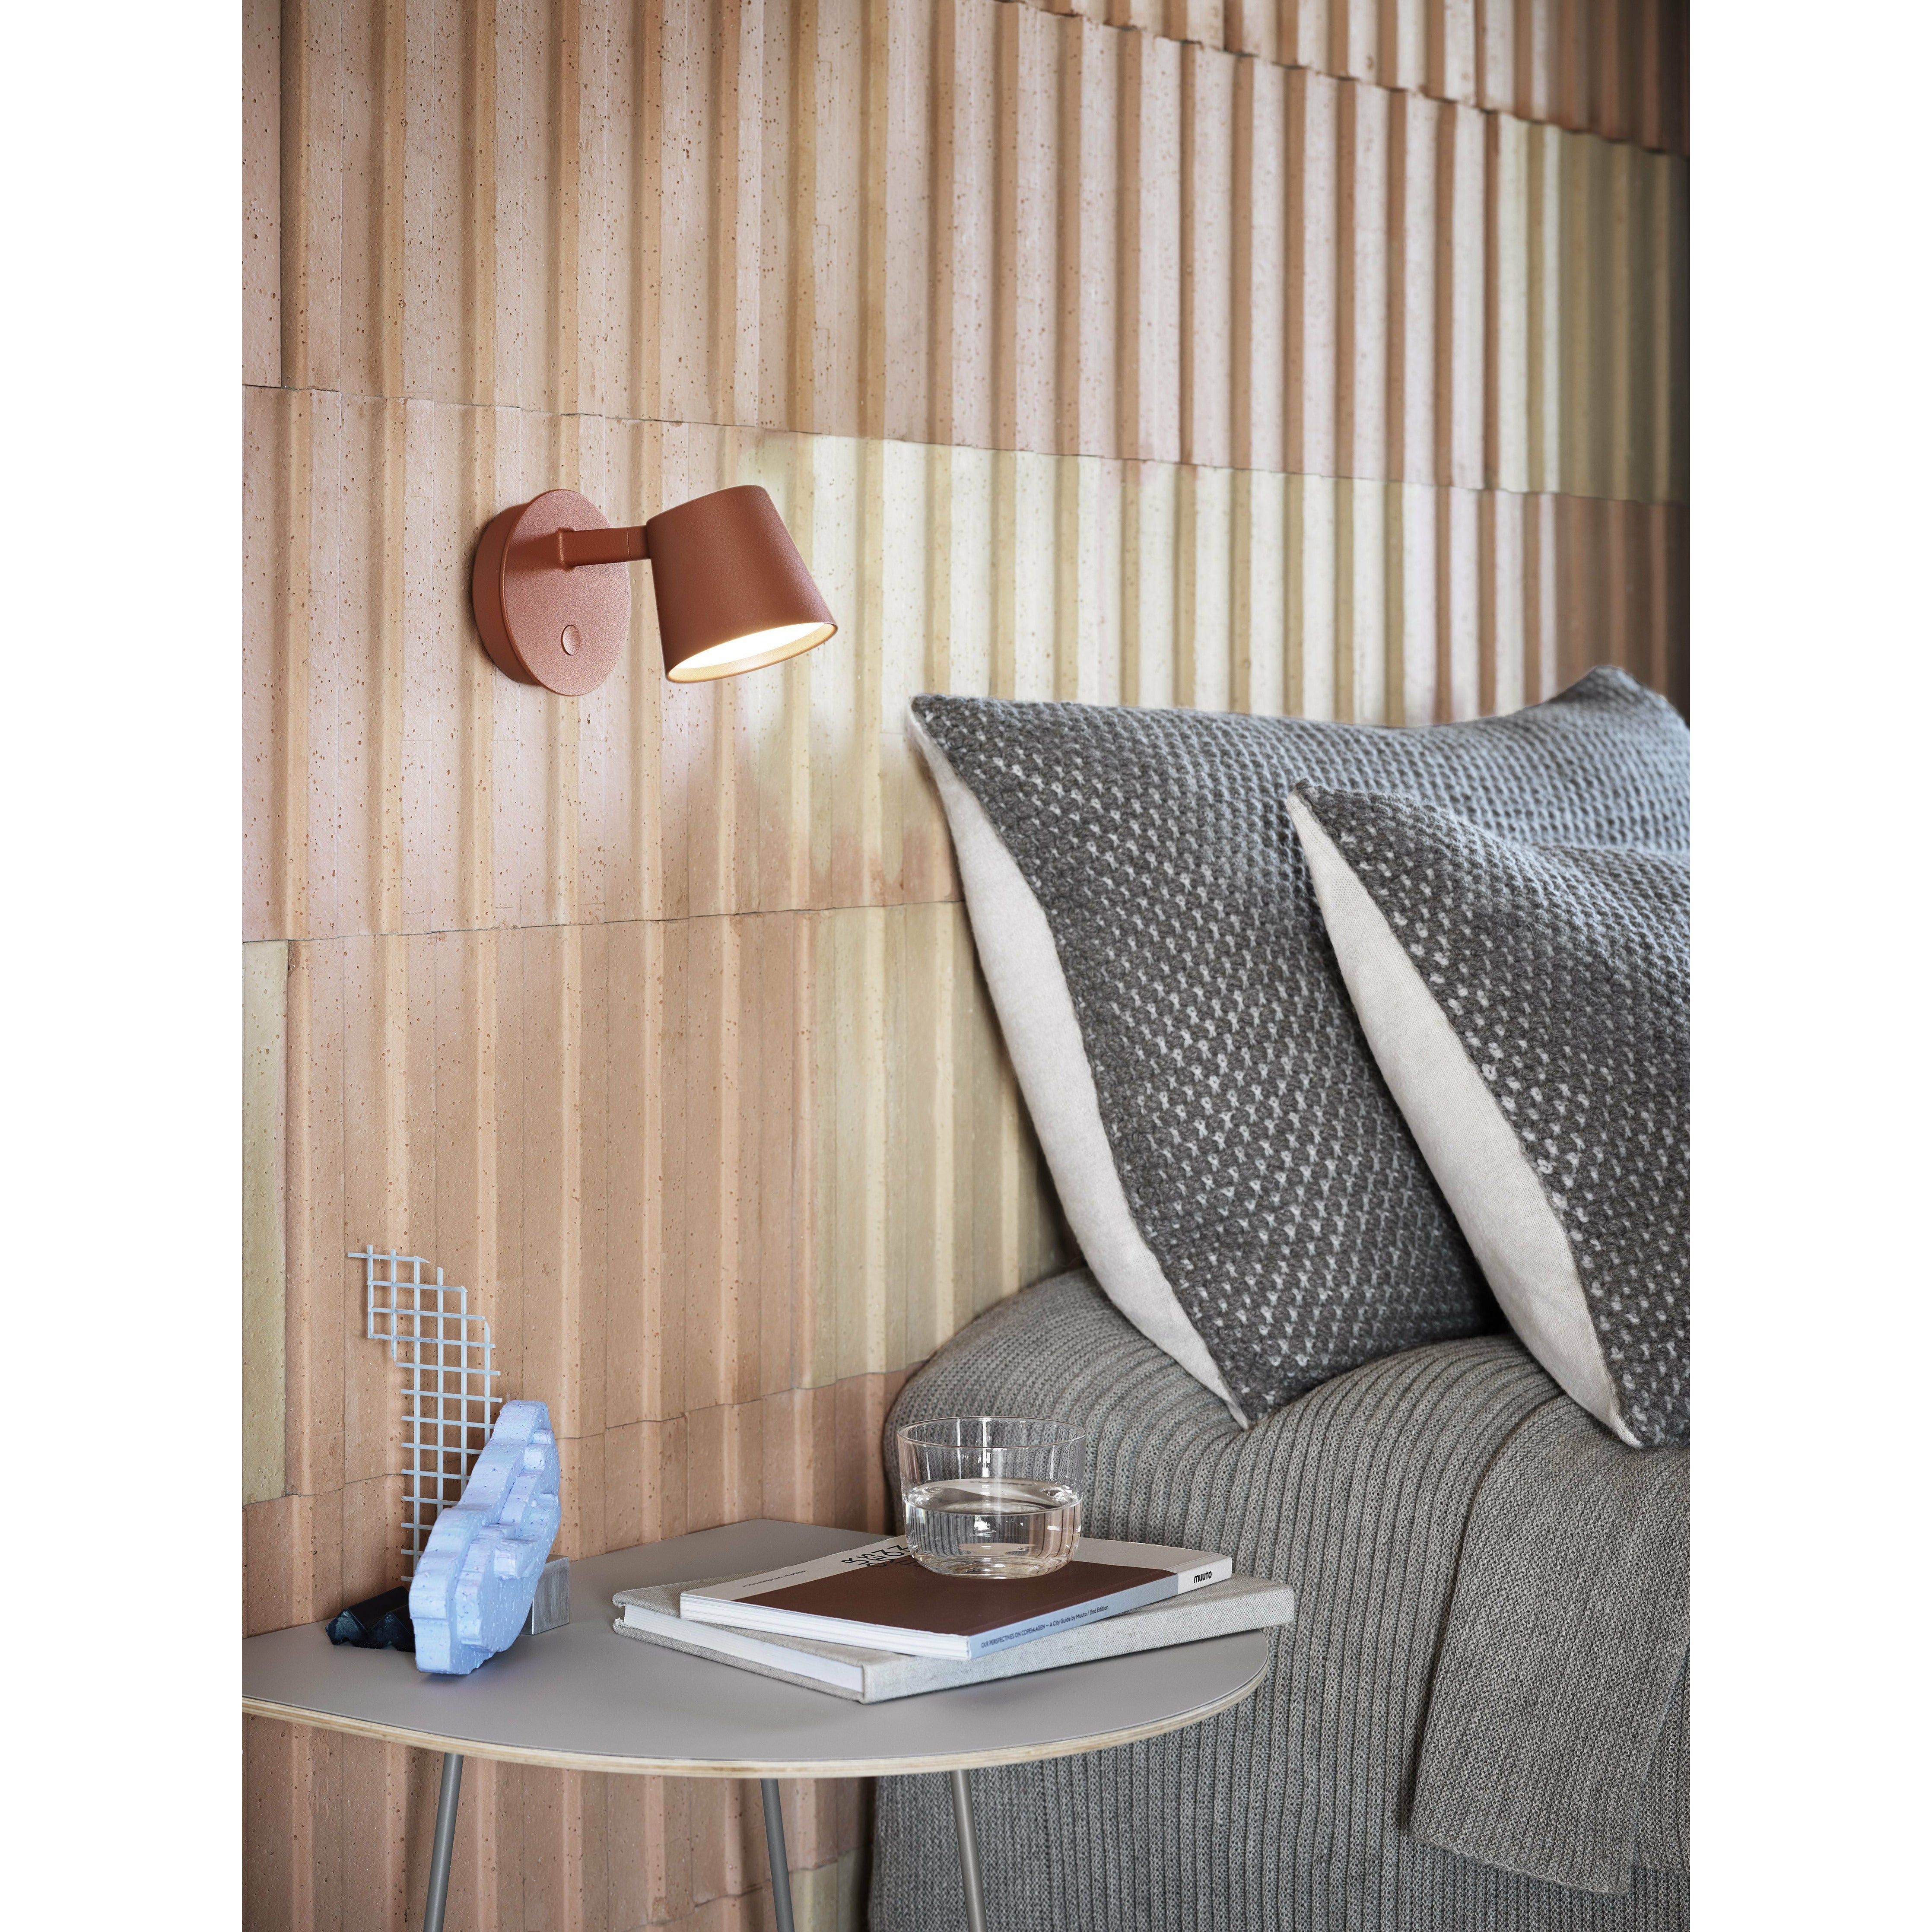 Muuto Tip Led Wall Lamp, Copper Brown